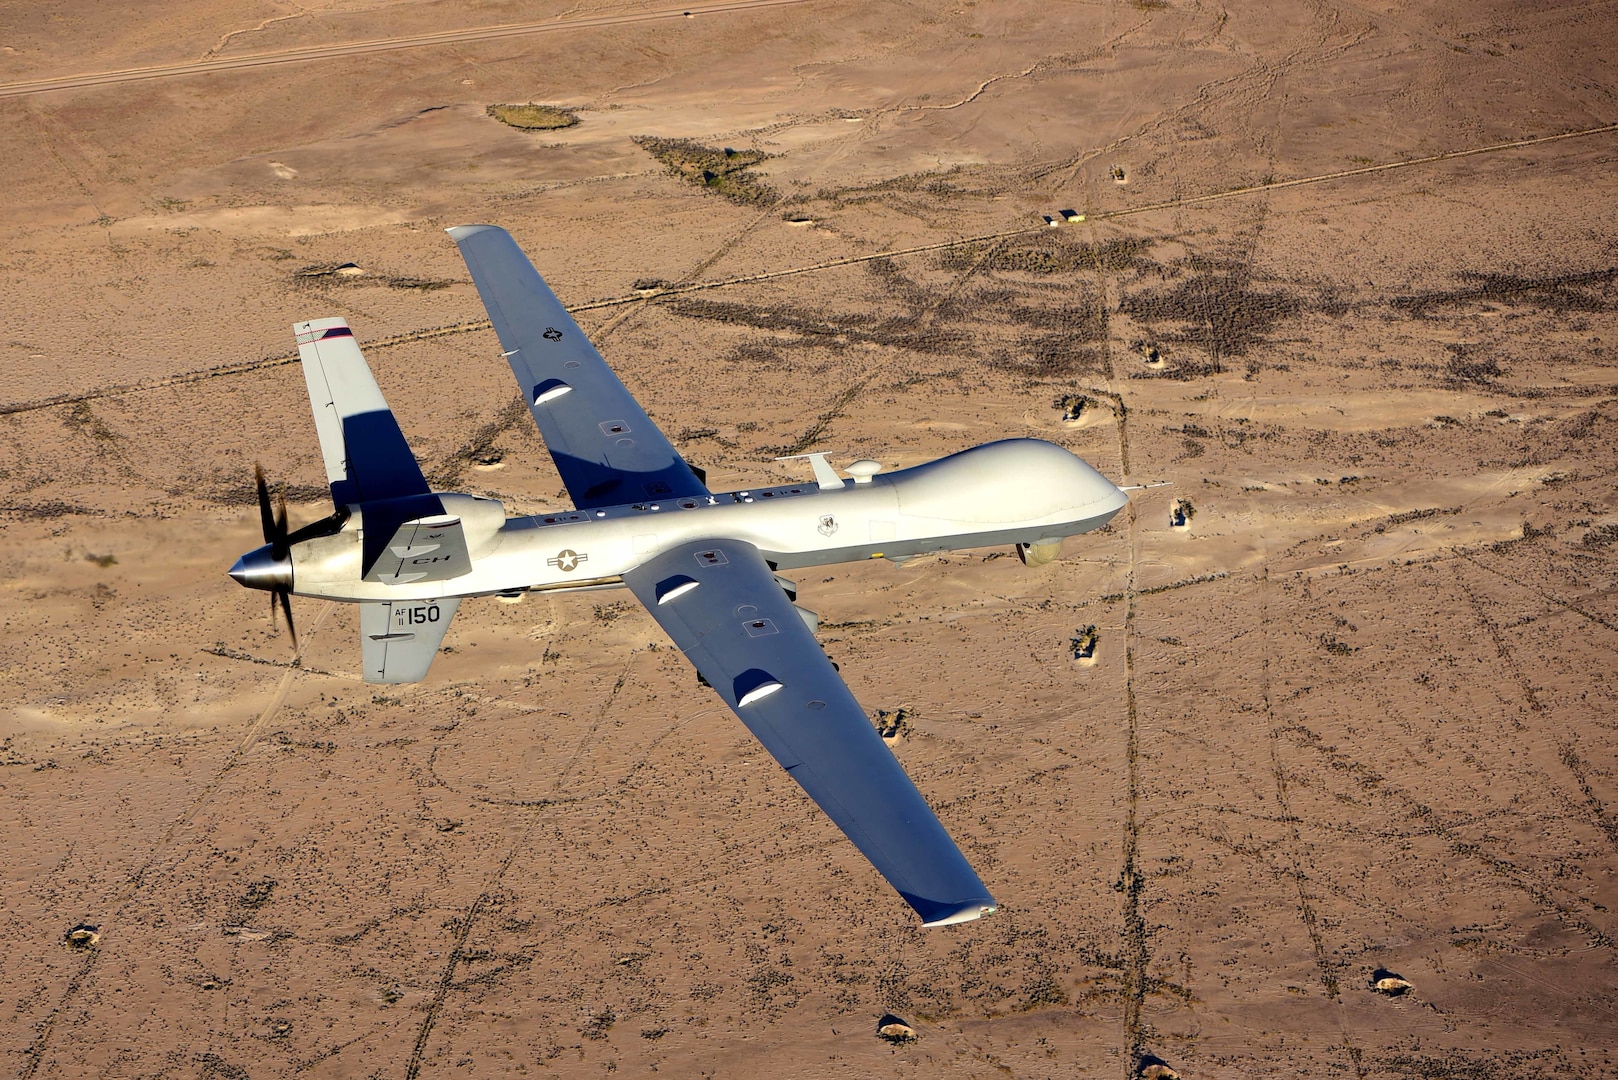 An MQ-9 Reaper flies a training mission over the Nevada Test and Training Range, July 15, 2019. MQ-9 crews can utilize kill boxes to perform air interdiction missions. (USAF photo by A1C William Rio Rosado)